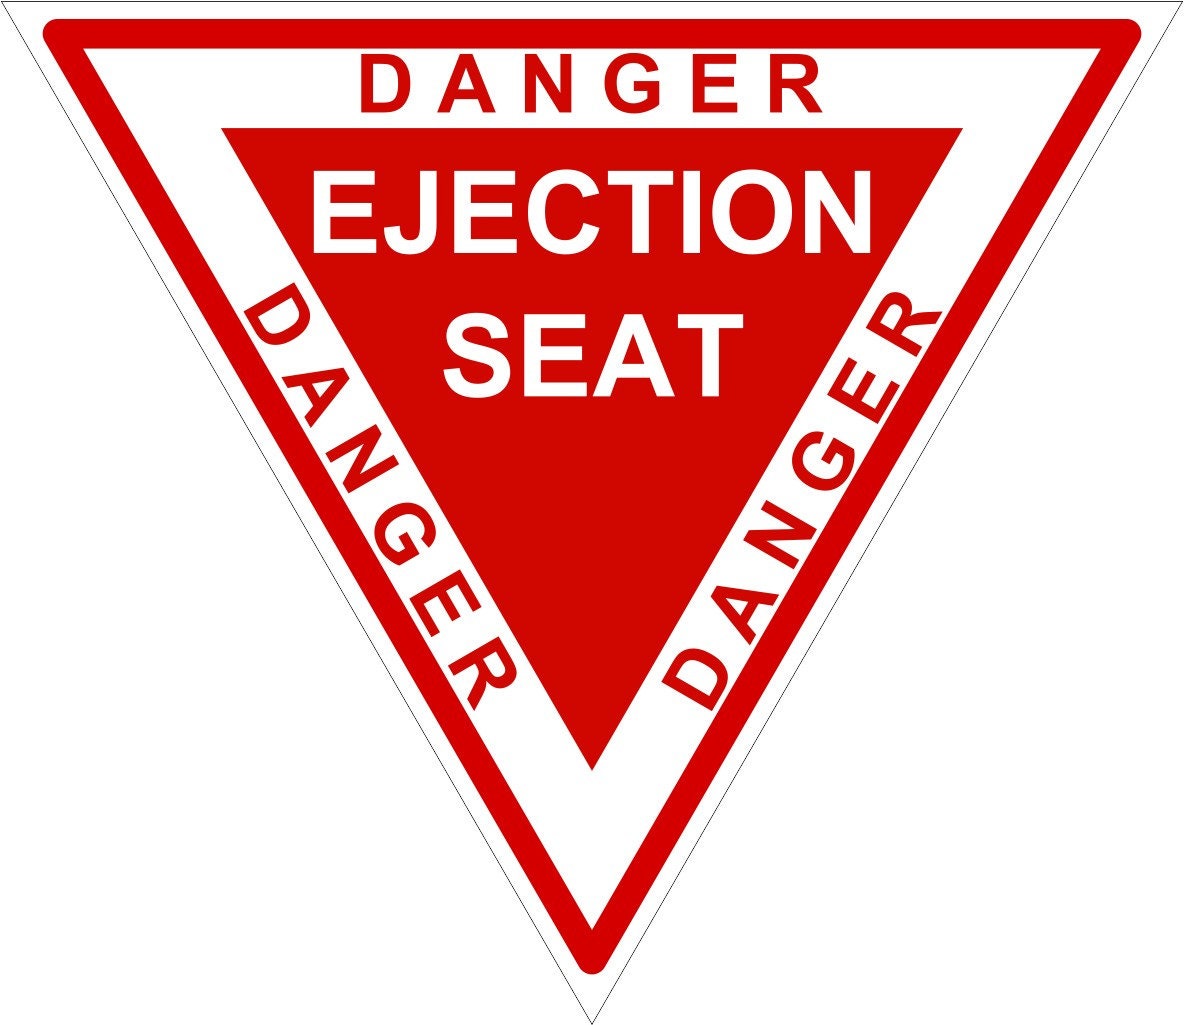 Buy　Sticker　Warning　Danger　Laptop　Ejection　Online　Eject　India　Etsy　Seat　Book　for　in